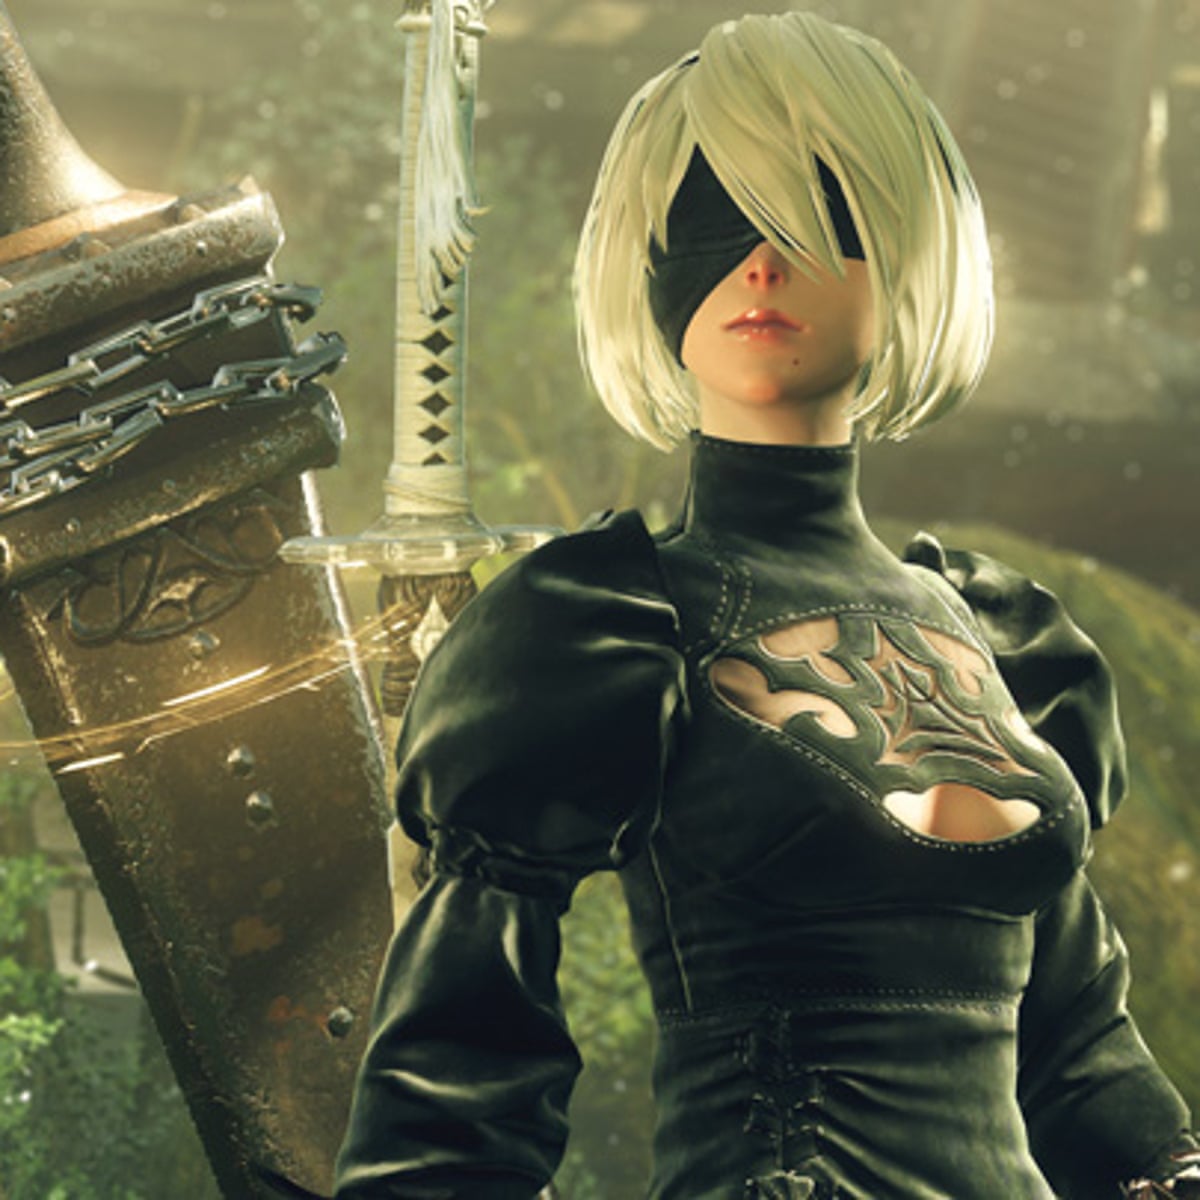 Nier: Automata – how a 'weird game for weird people' became a sleeper hit, Games